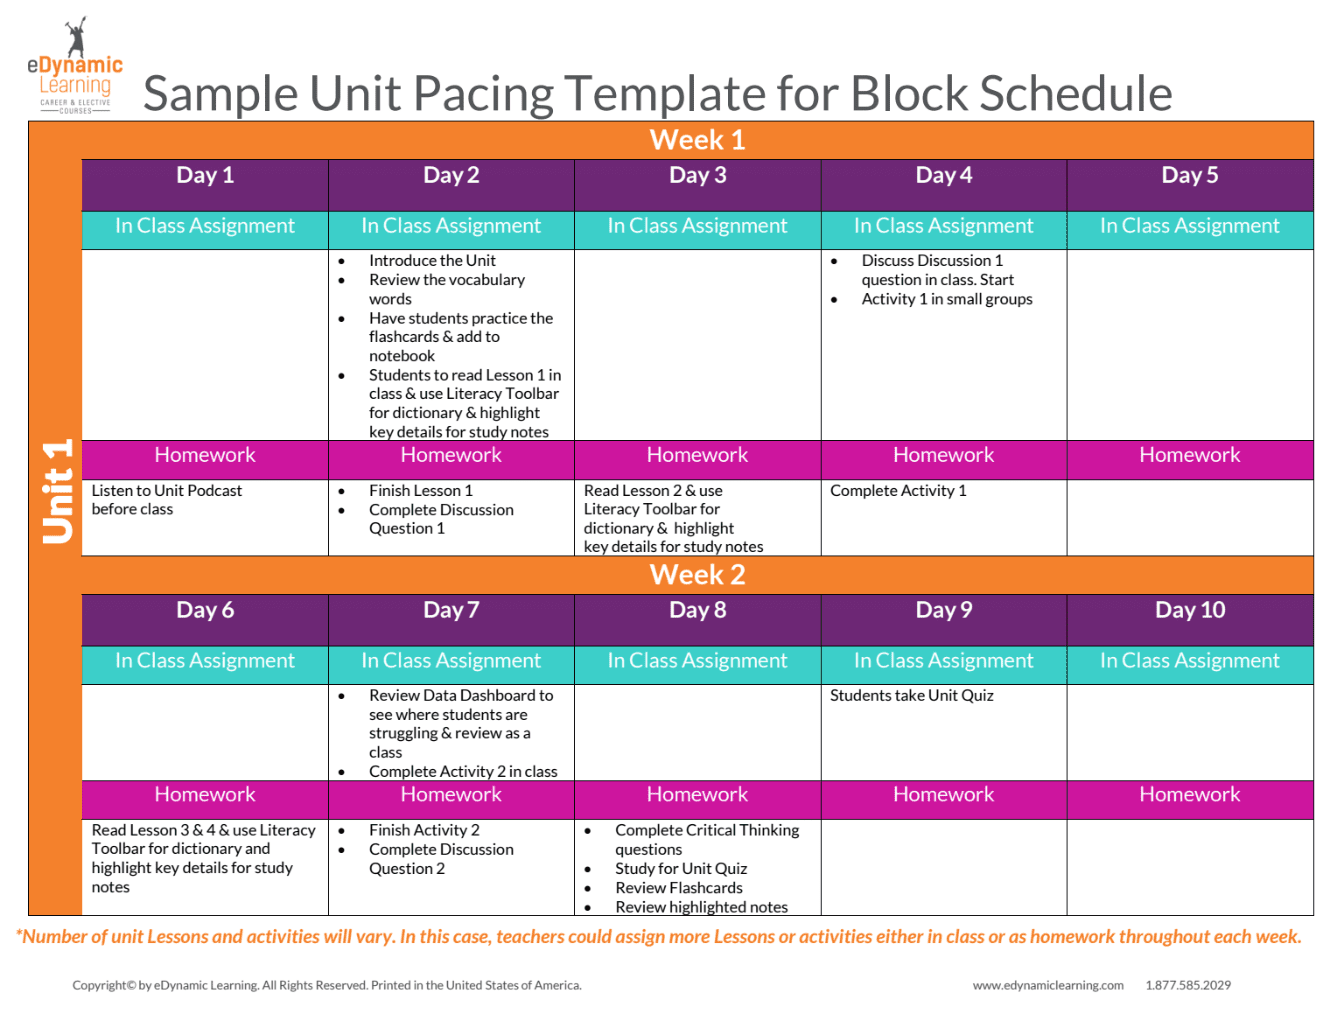 Sample Unit Pacing Template for Block Schedule